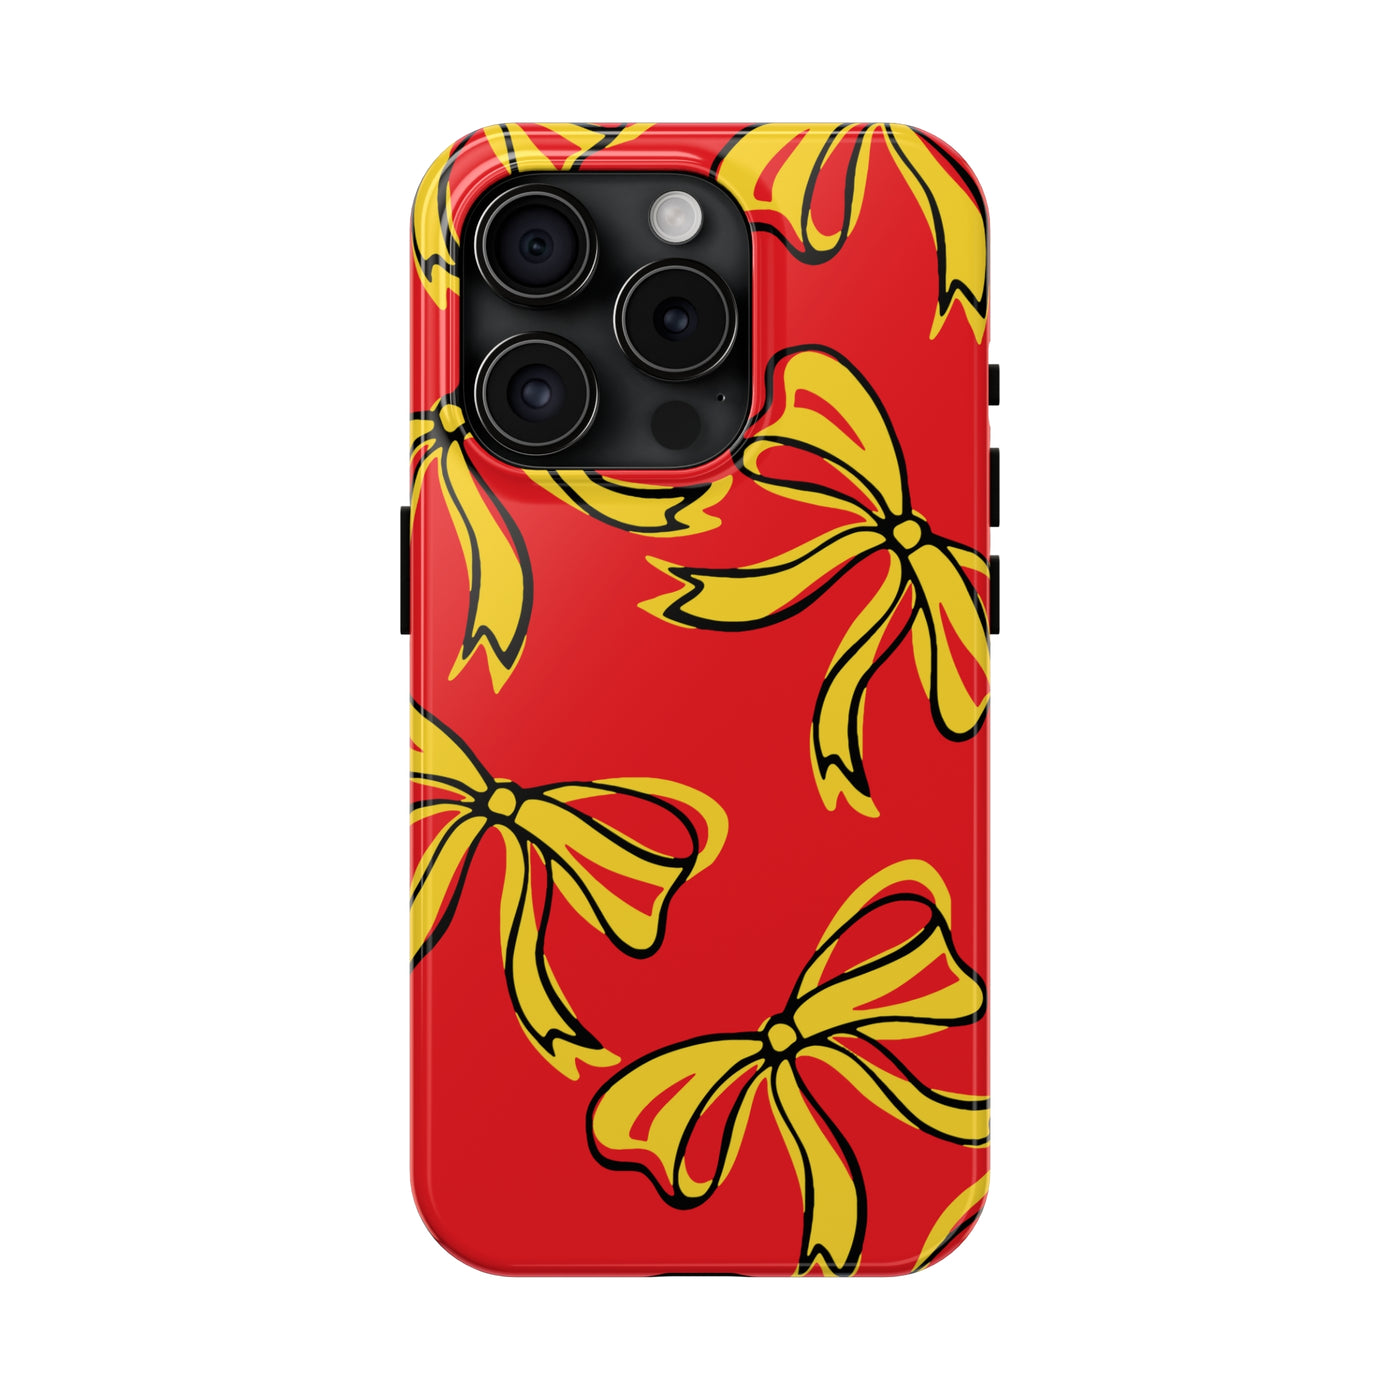 Trendy Bow Phone Case, Bed Party Bow Iphone case, Bow Phone Case, College Case, Bow Gift - Maryland, Terps, Terrapins, UMD, Red Gold & Black